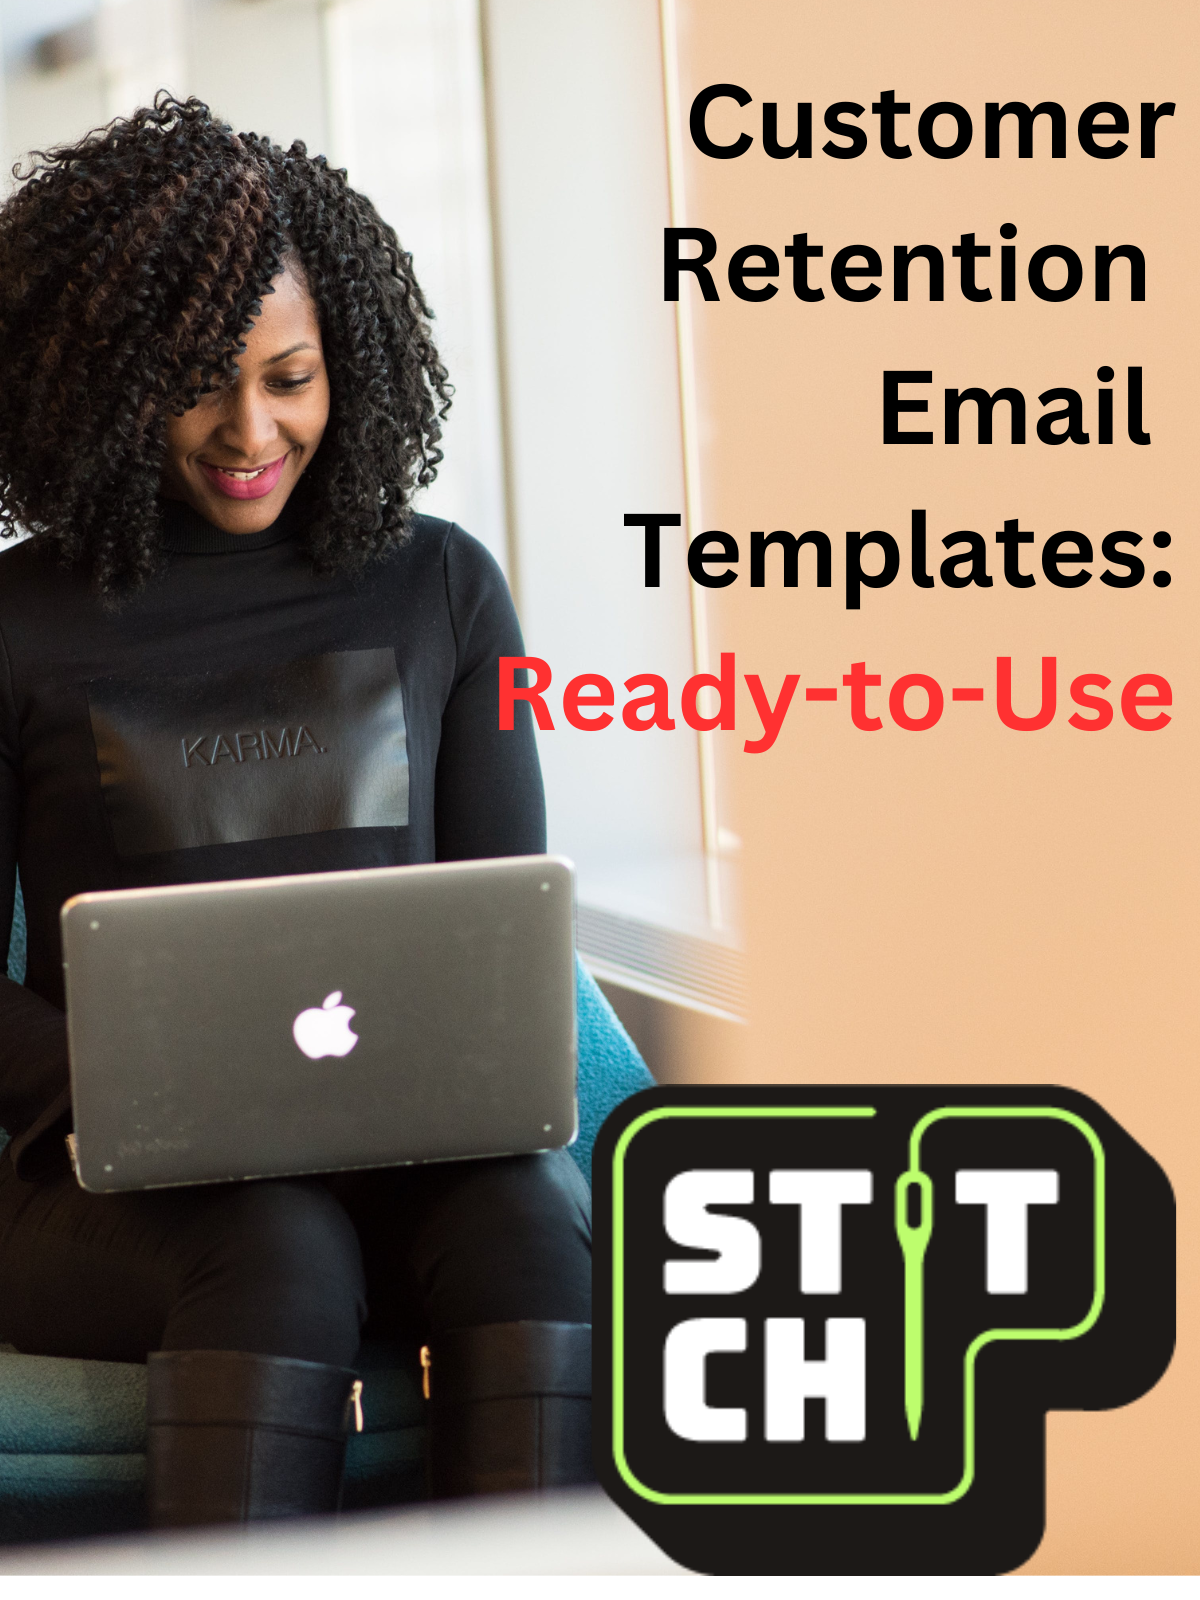 Customer Retention Email Templates, Customer Retention Email examples